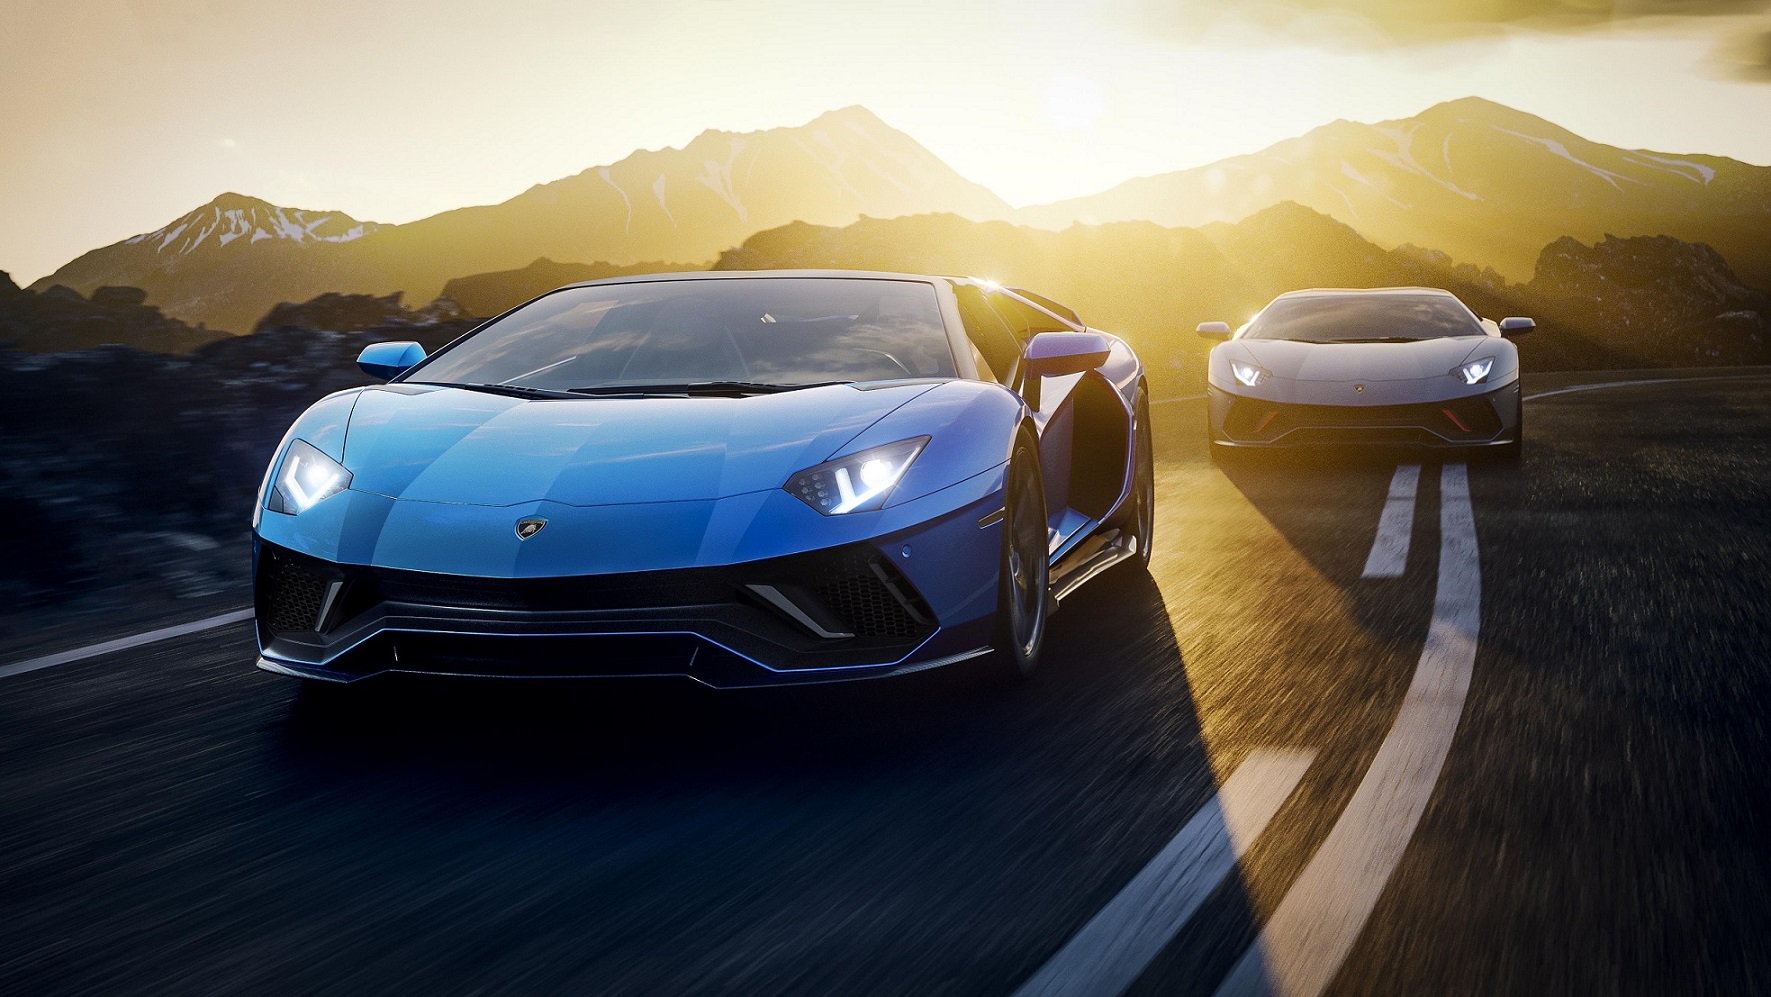 Automobili Lamborghini sets another record result for deliveries  in the first nine months of 2021